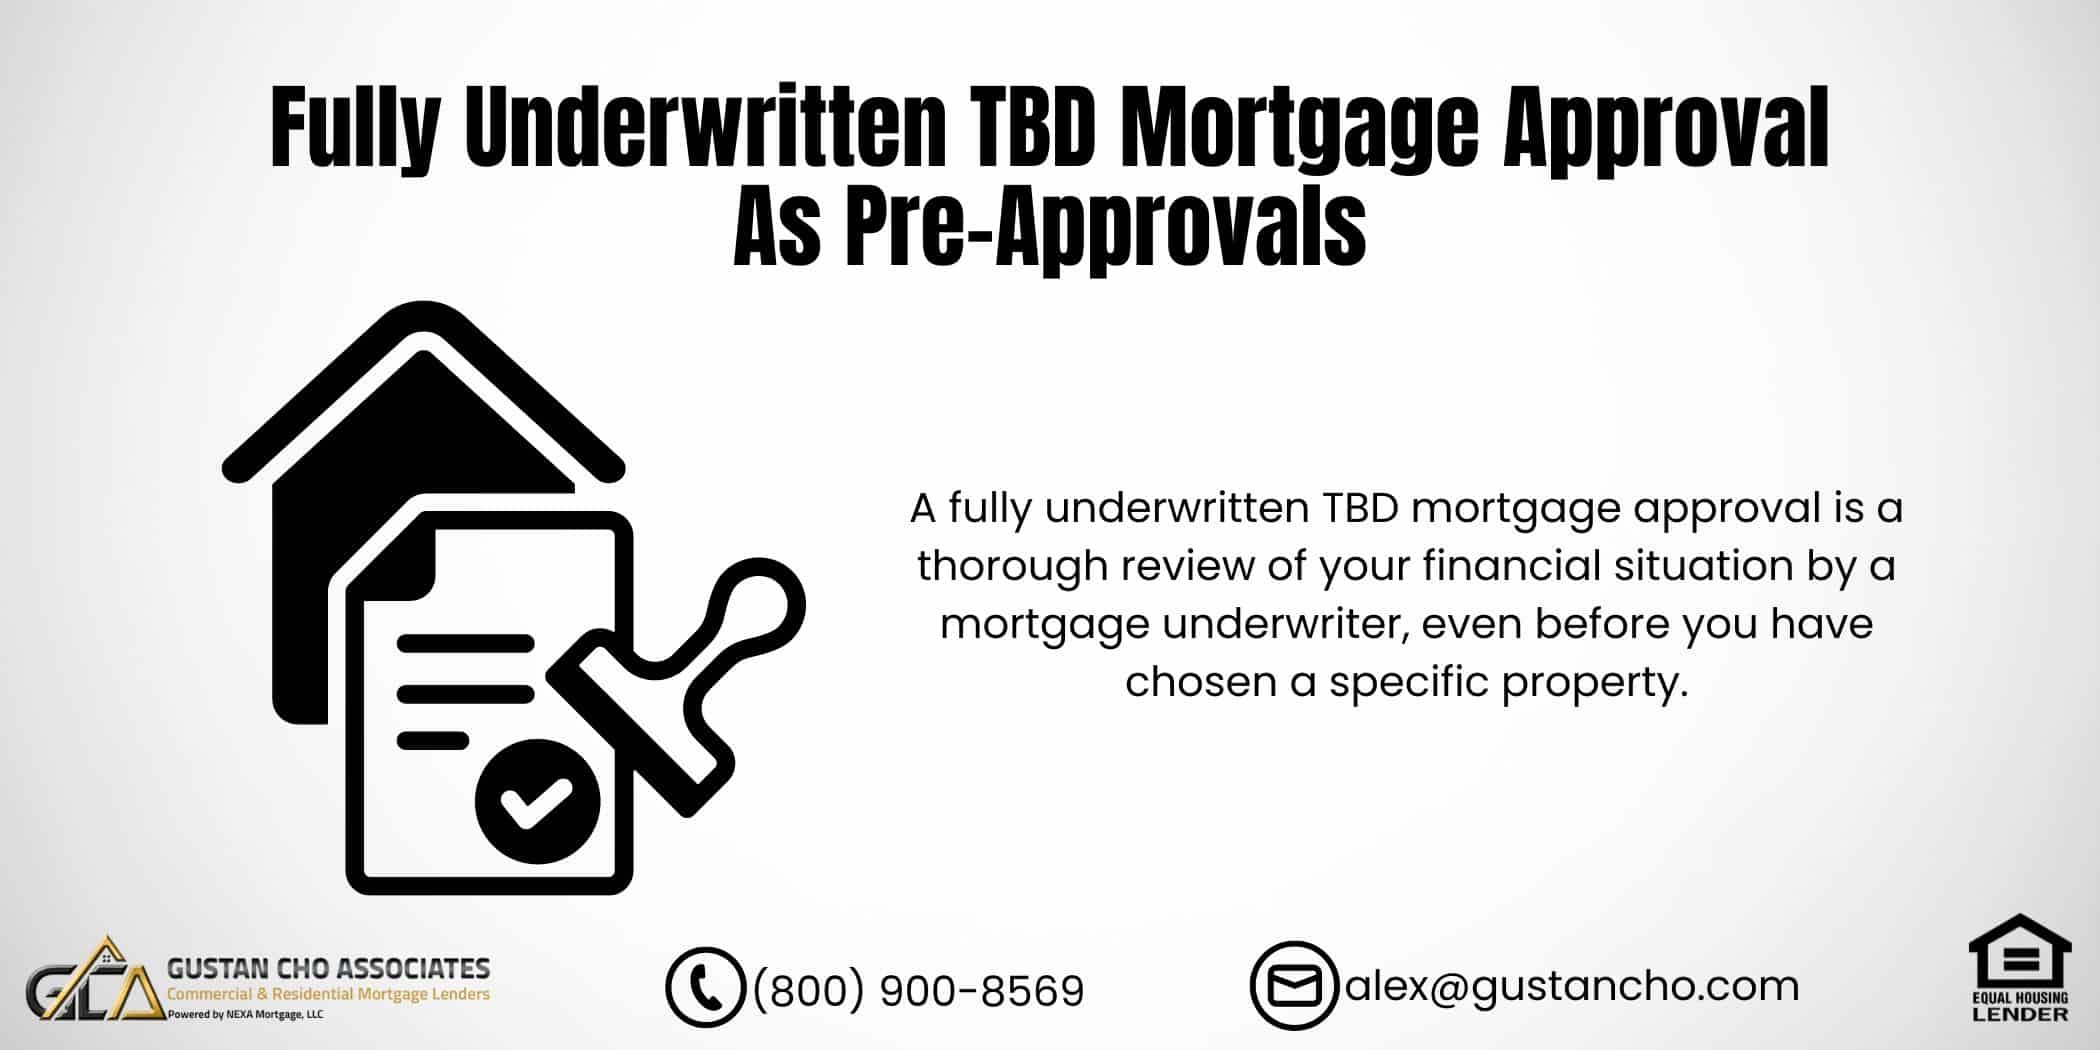 Fully Underwritten TBD Mortgage Approval